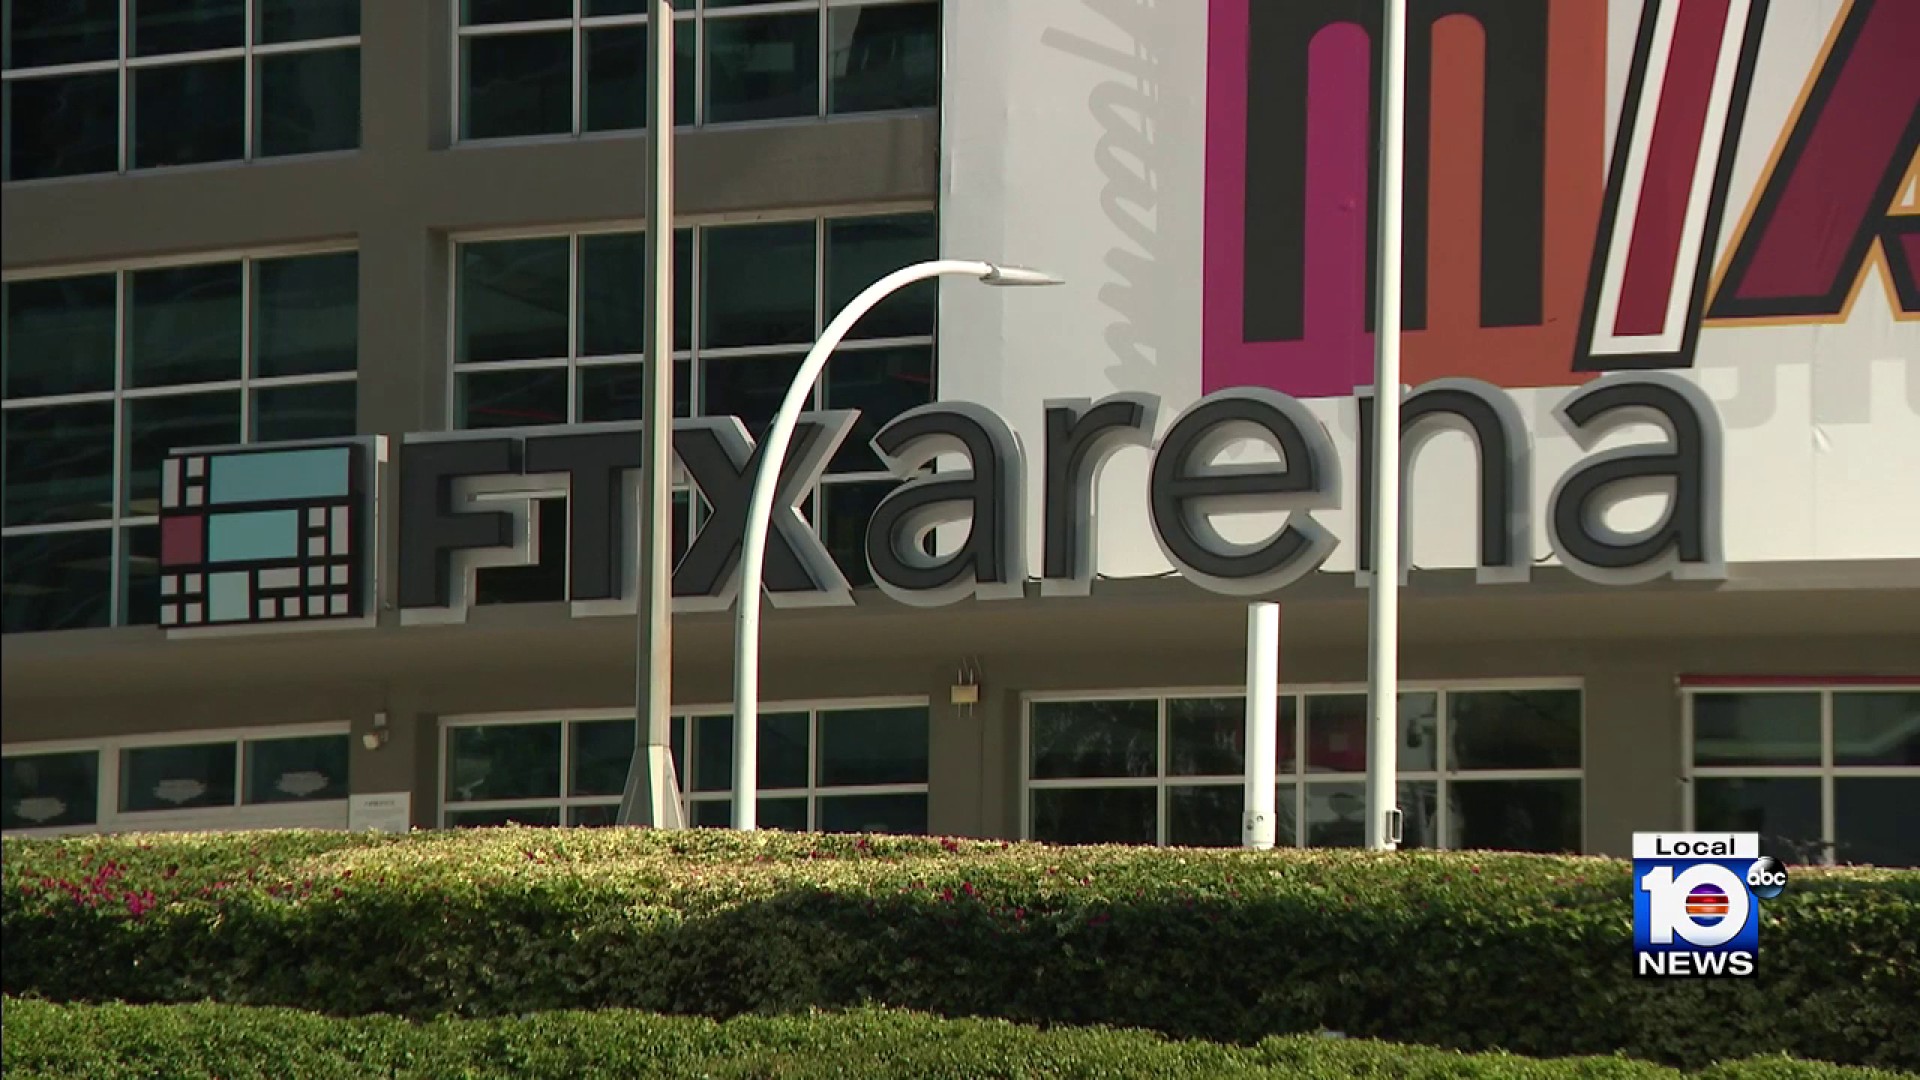 New naming rights agreement for Miami Heat arena gives county $5 million  annual increase on old deal